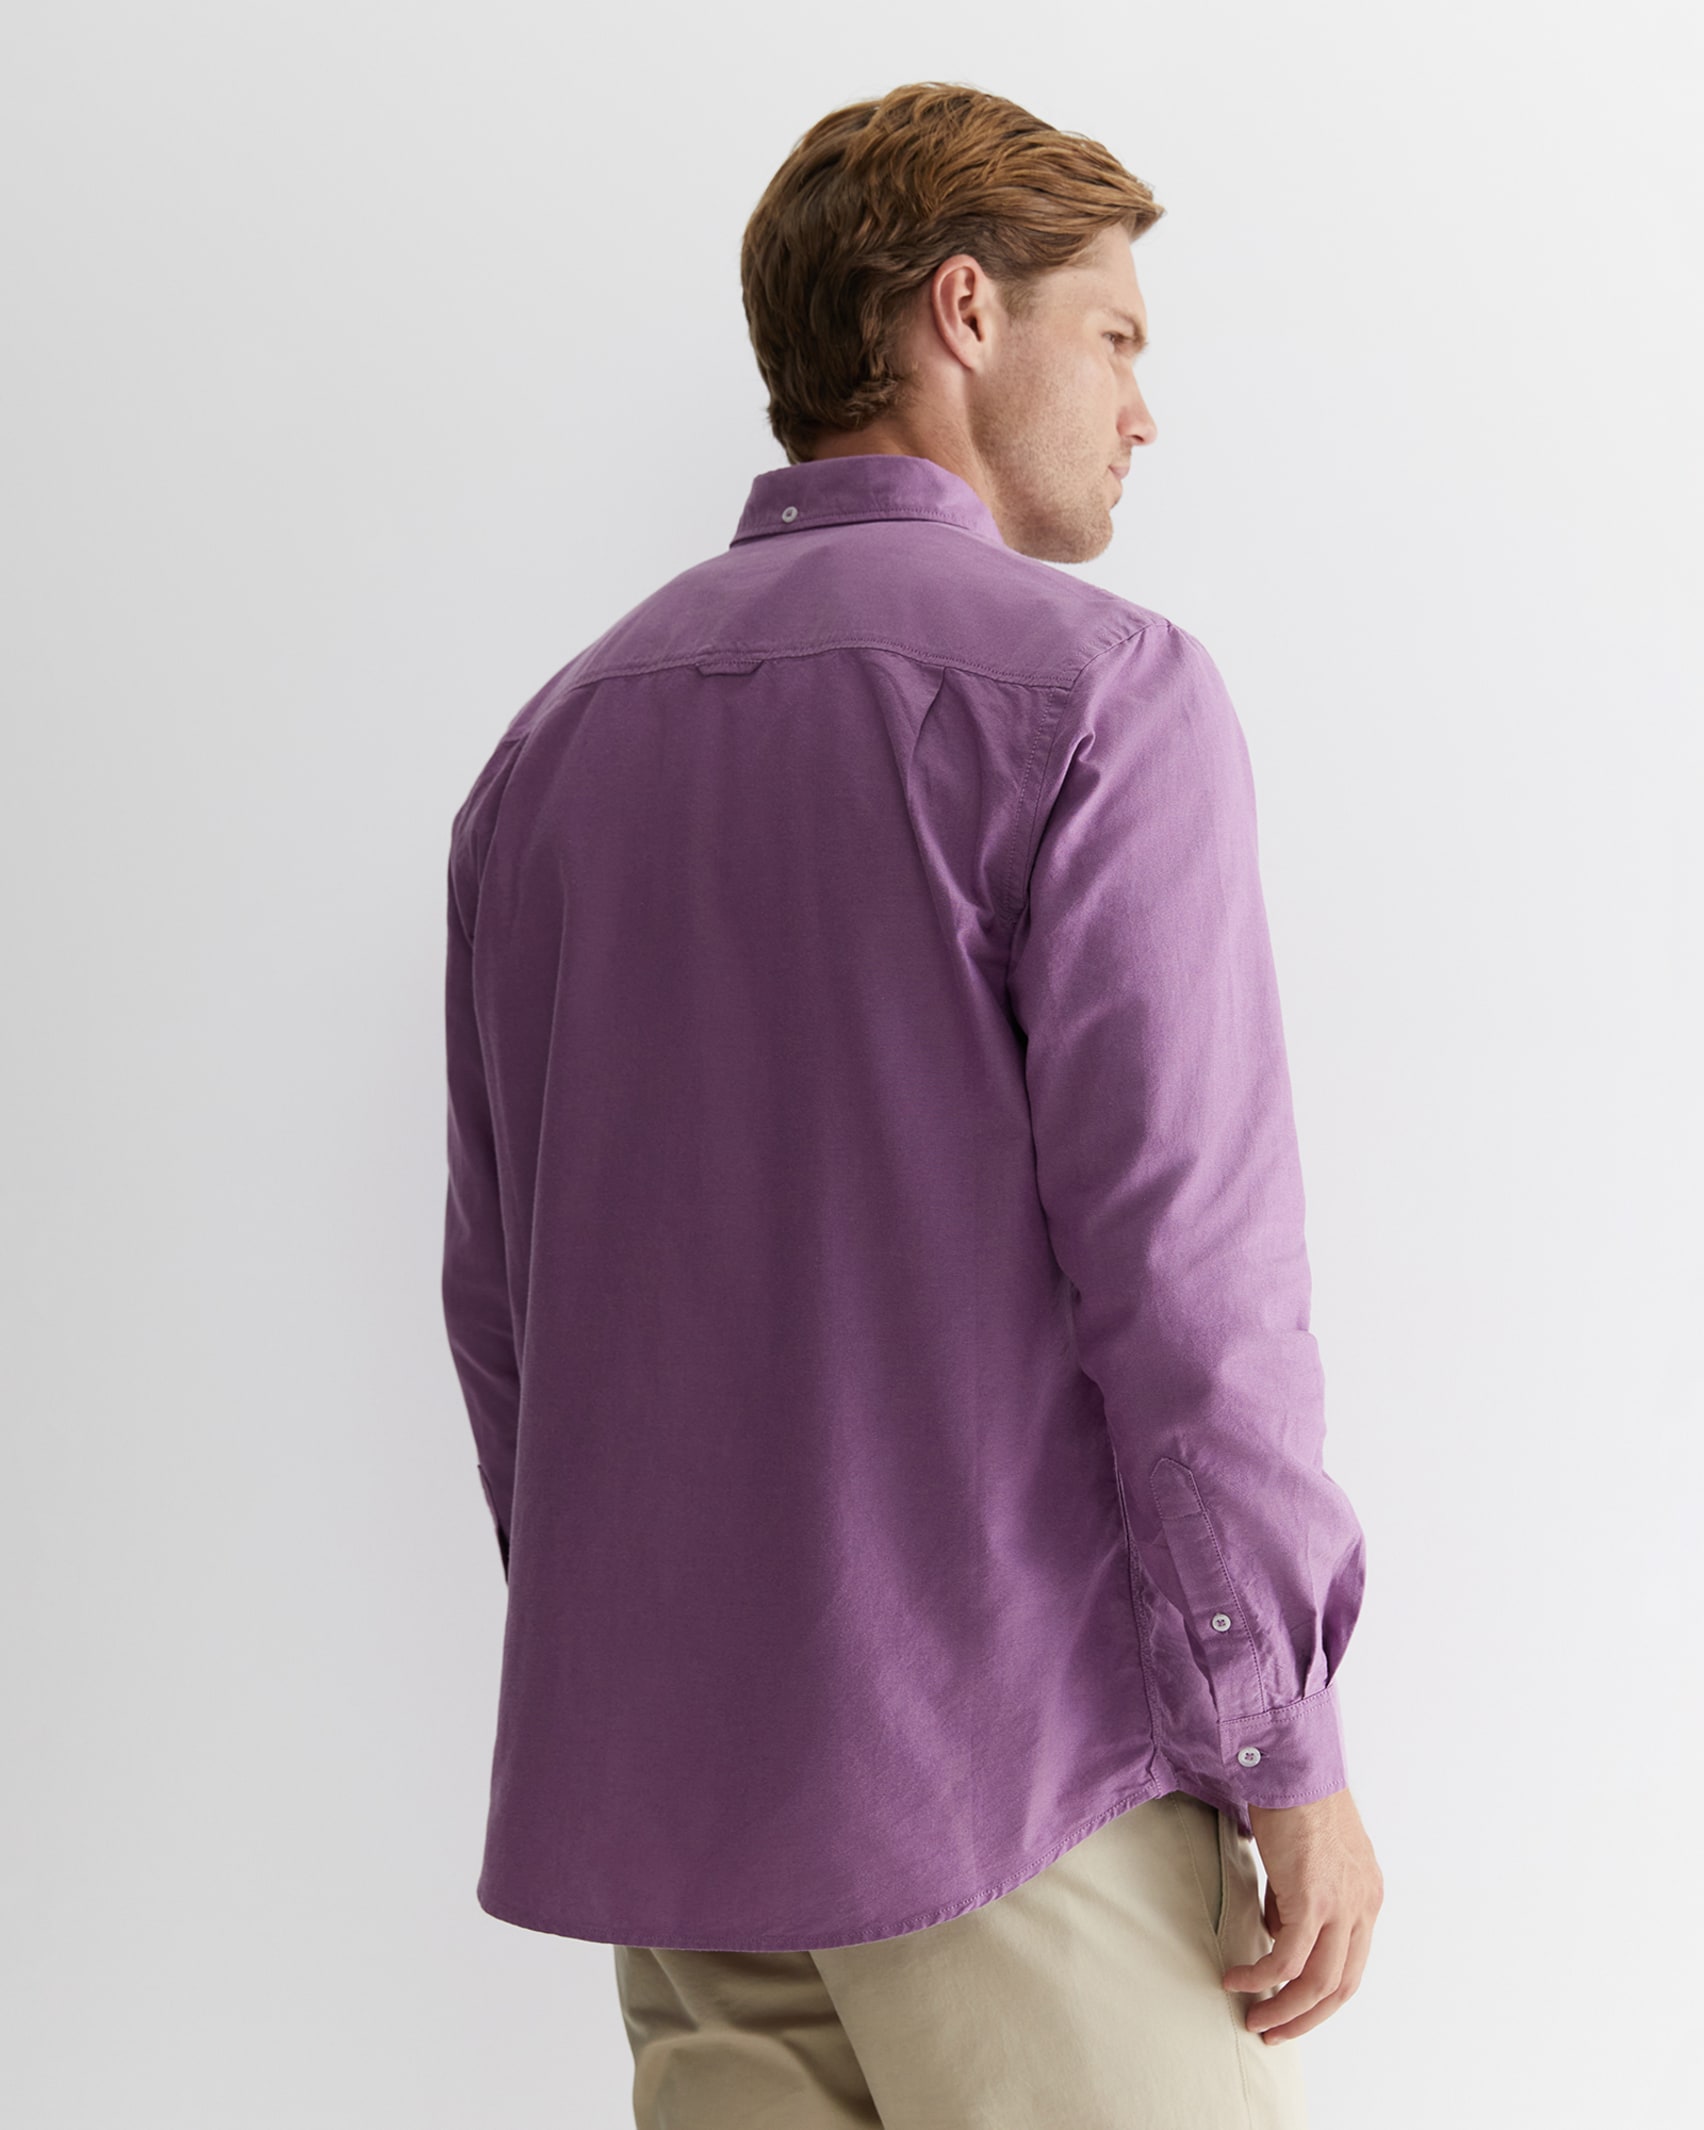 Oxford Long Sleeve Shirt in LILAC